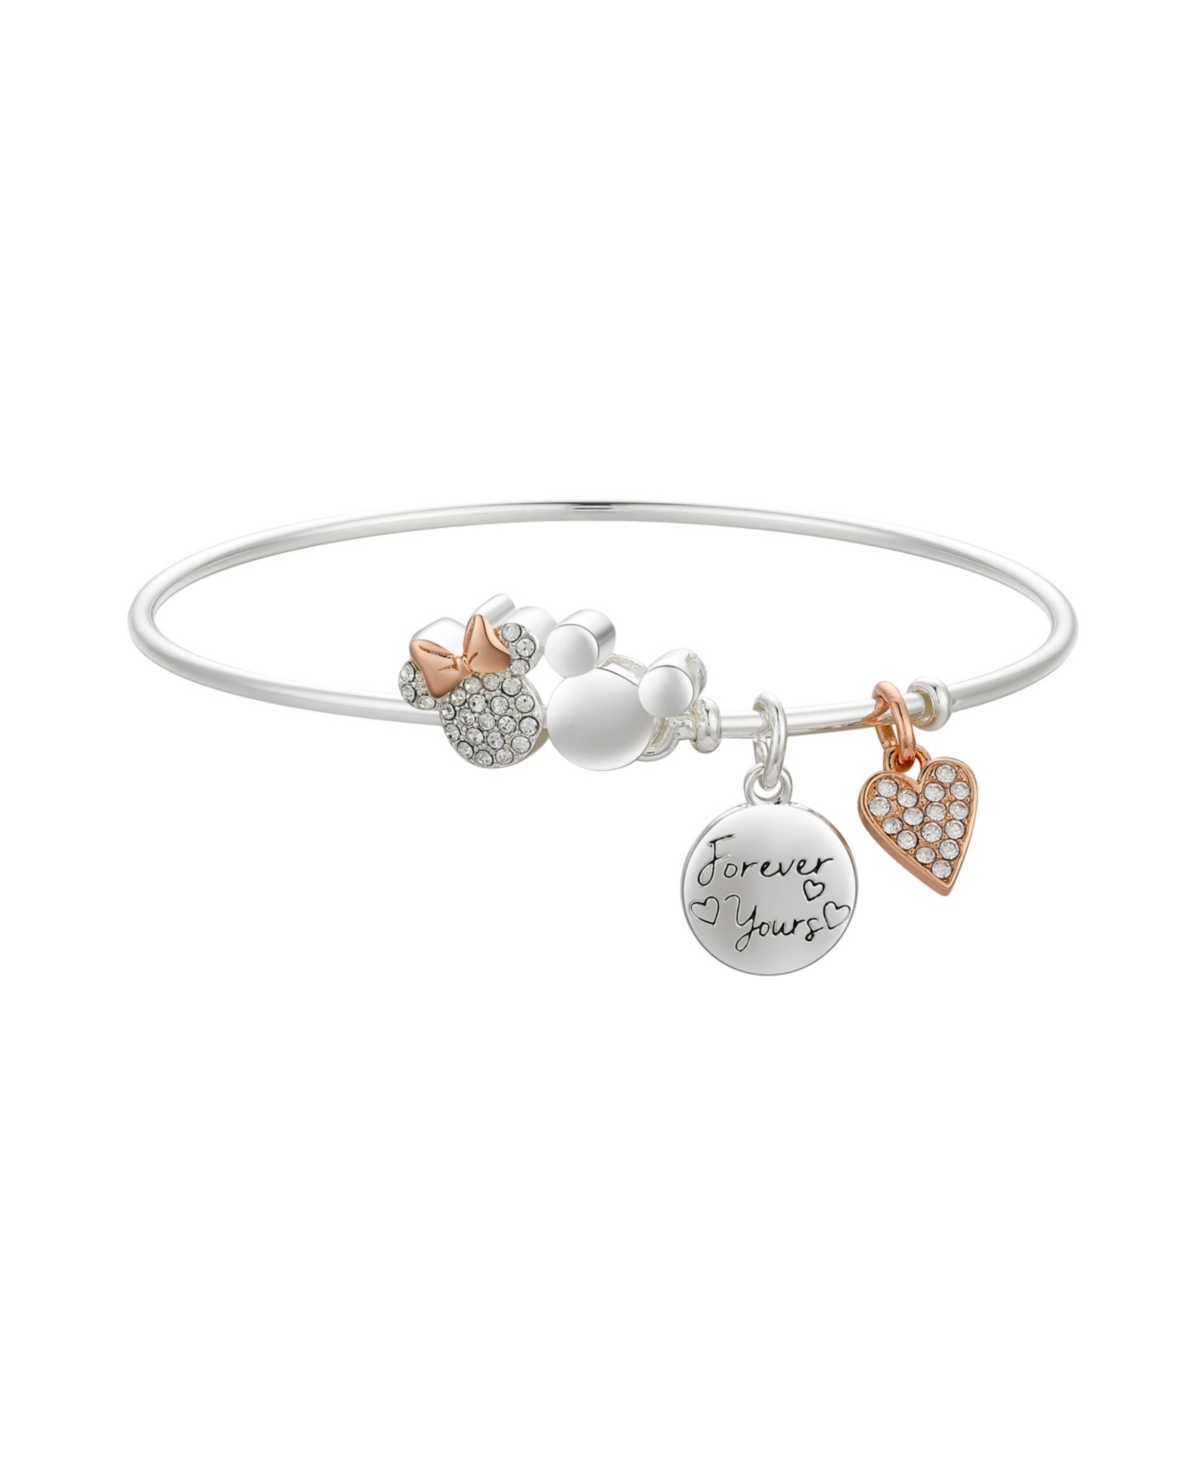 DISNEY UNWRITTEN CRYSTAL MICKEY AND MINNIE SILVER-PLATED "FOREVER YOURS" HEART CATCH BRACELET